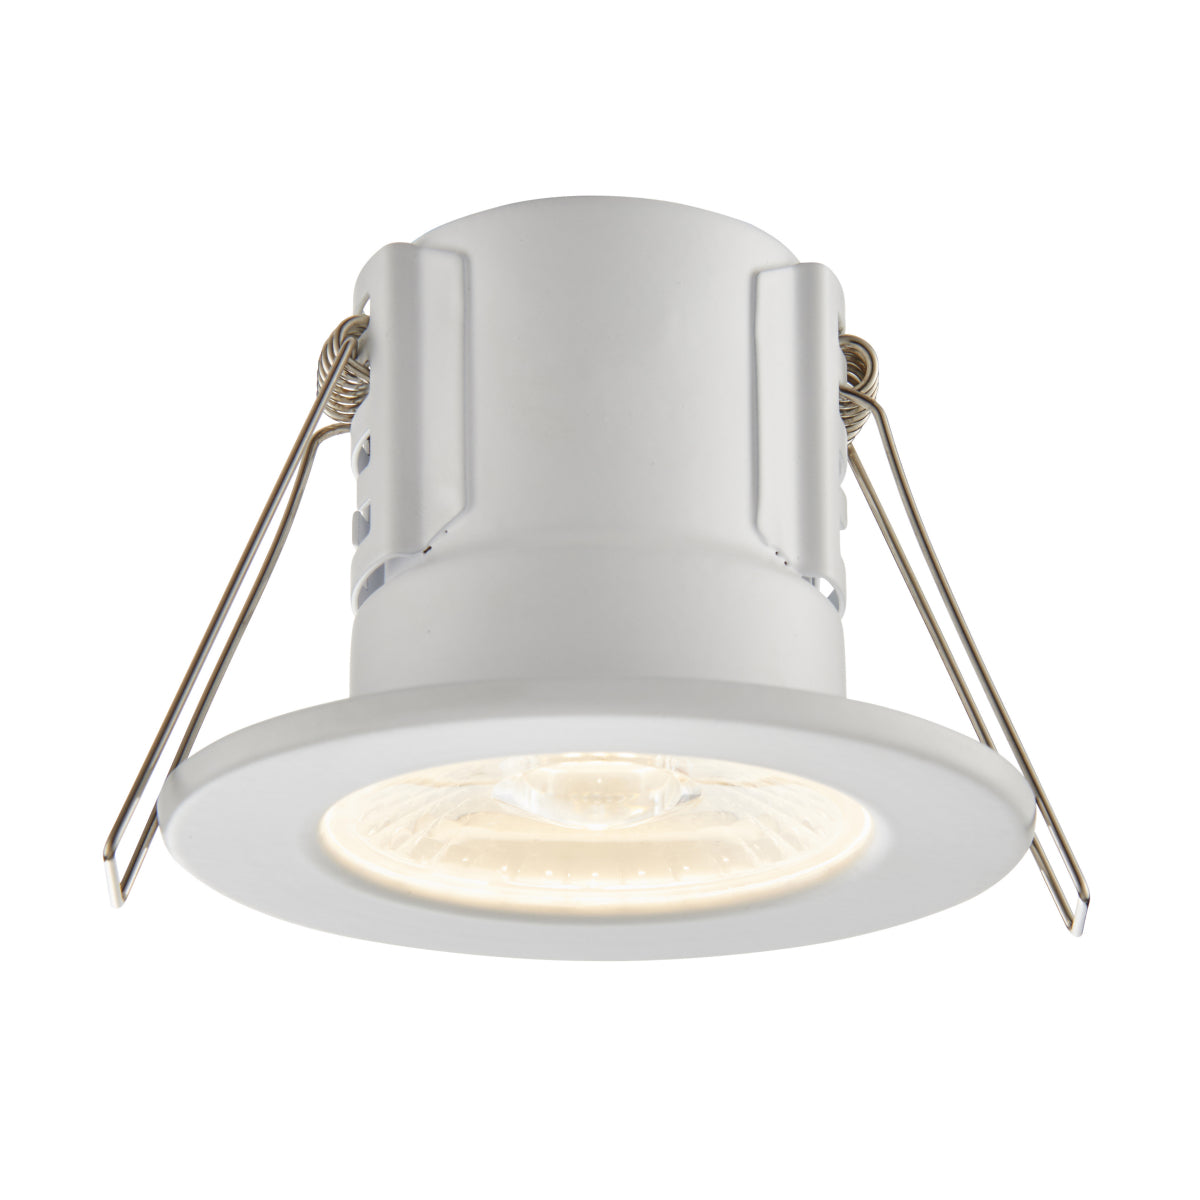 Recessed Ceiling Lights